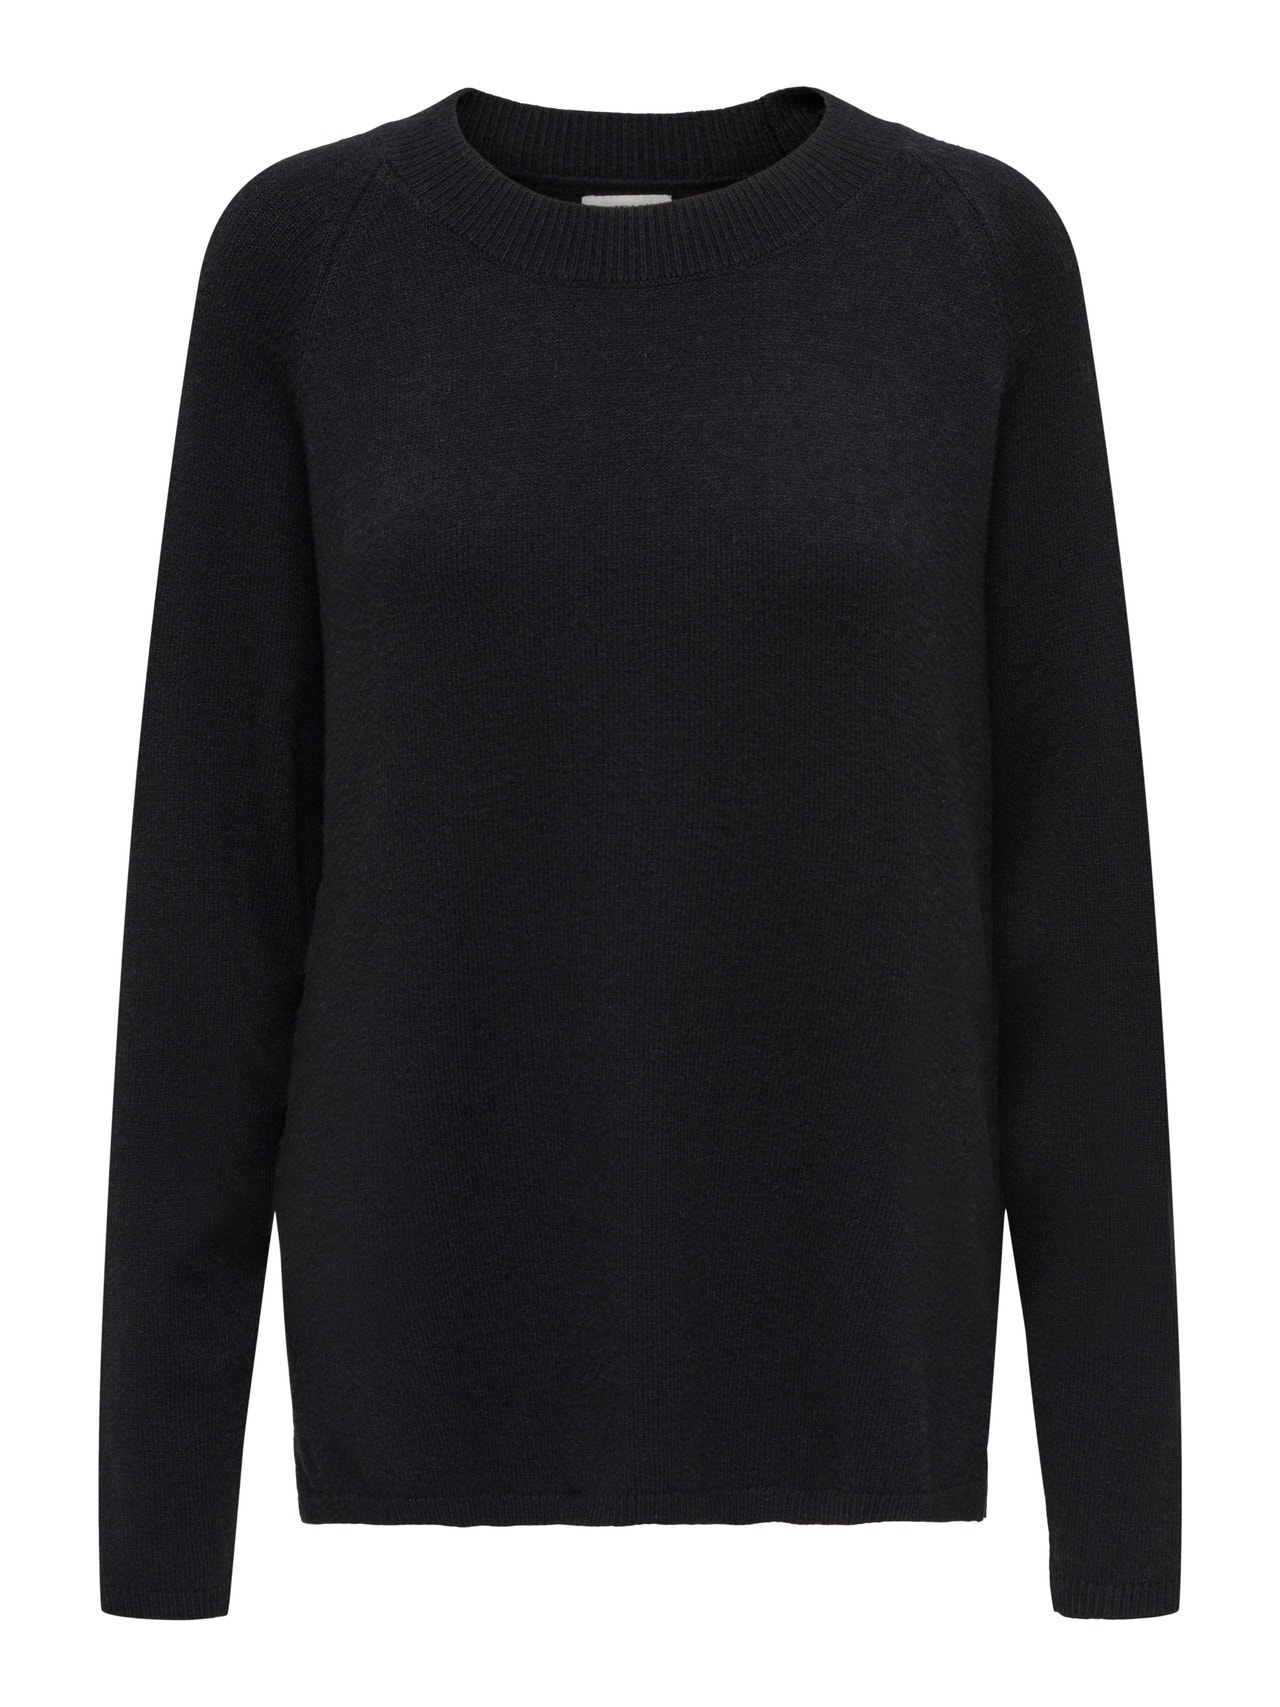 ONLY Knit Fit Round Neck Pullover -Black - 15292897